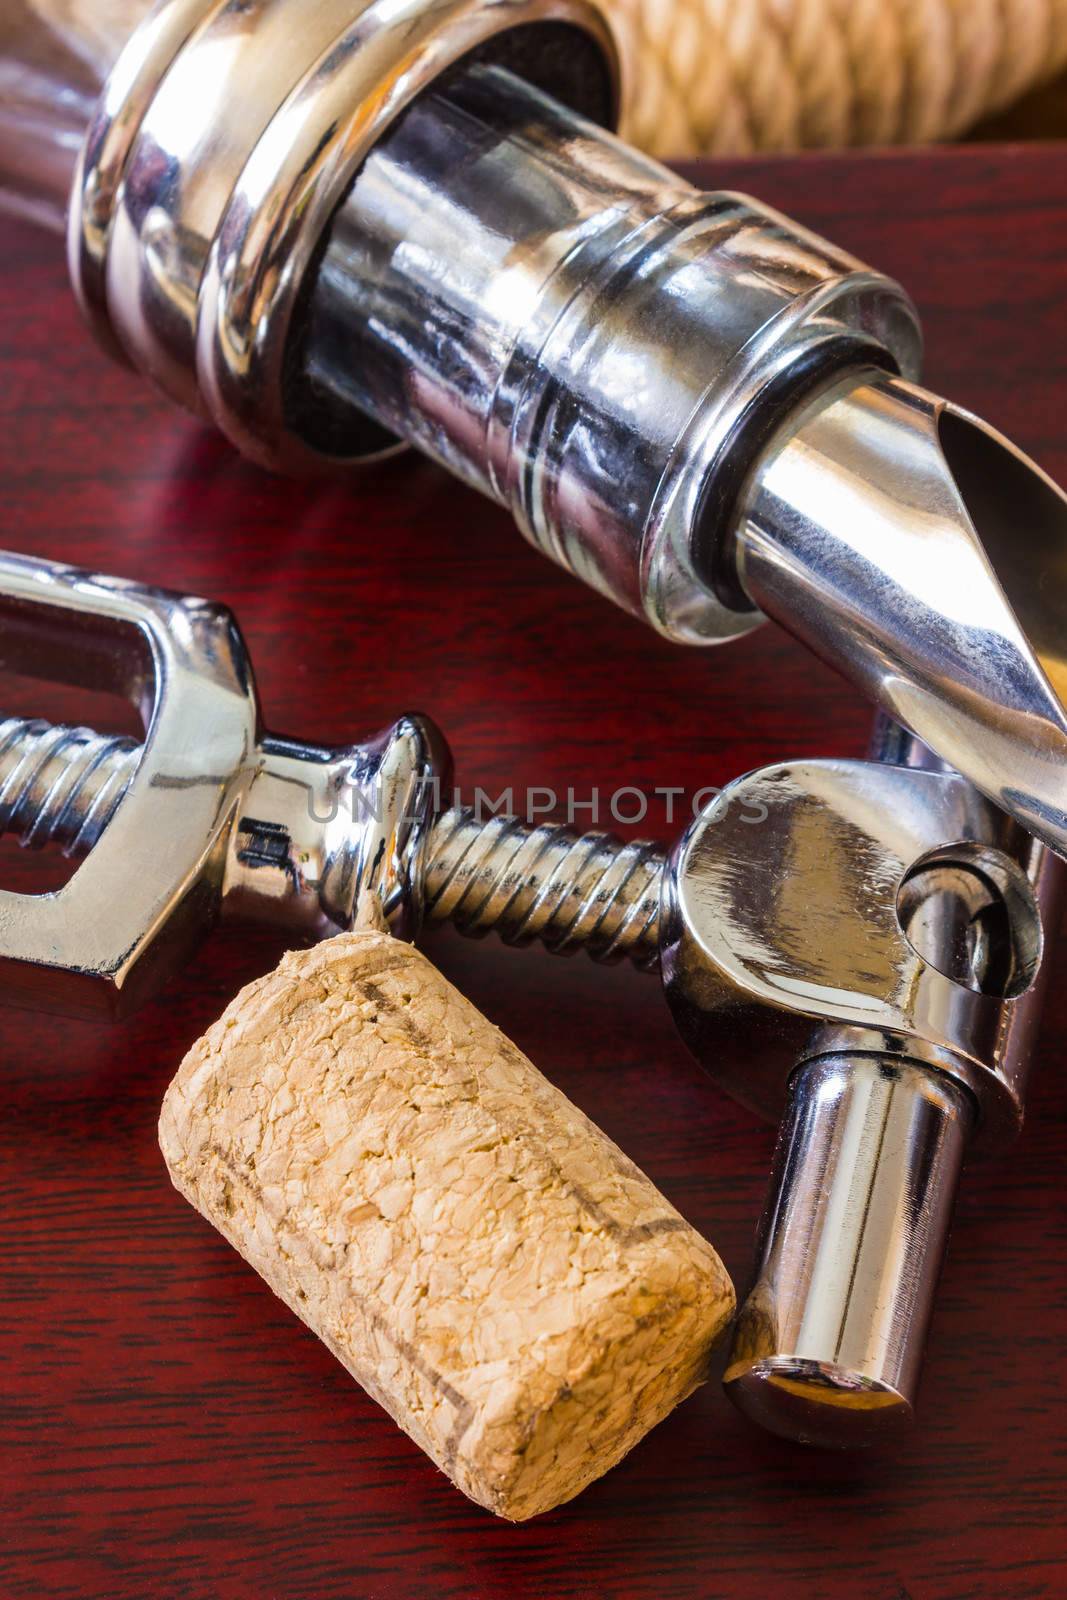 The bottle with corkscrew and wine accessories by oleg_zhukov